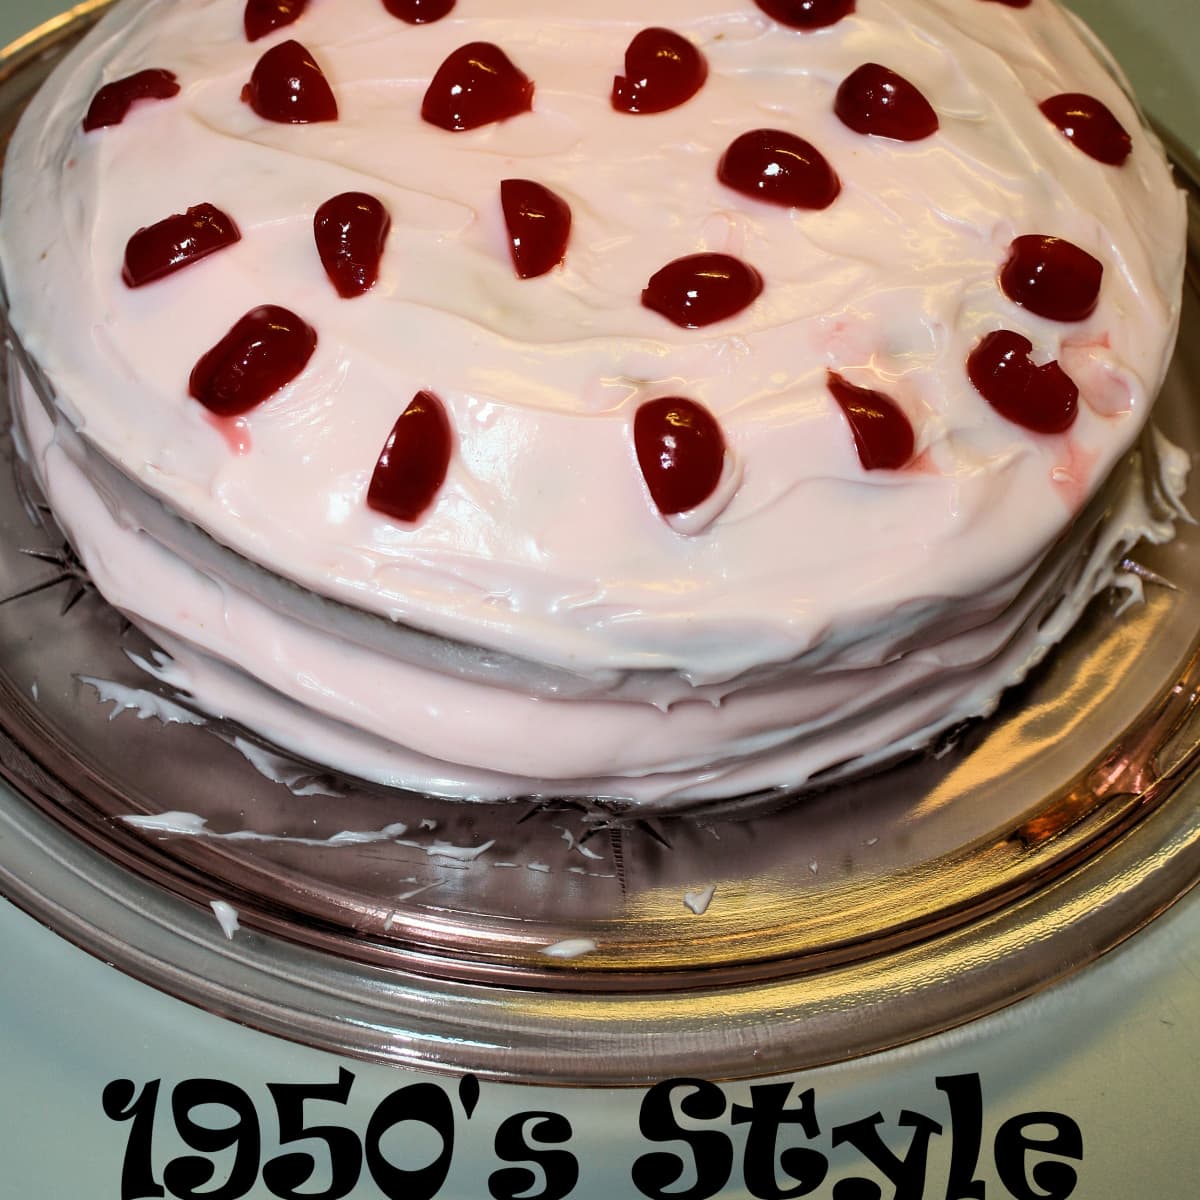 25 Vintage 1950s Cake Recipes That Deserve a Place in Your Recipe Box